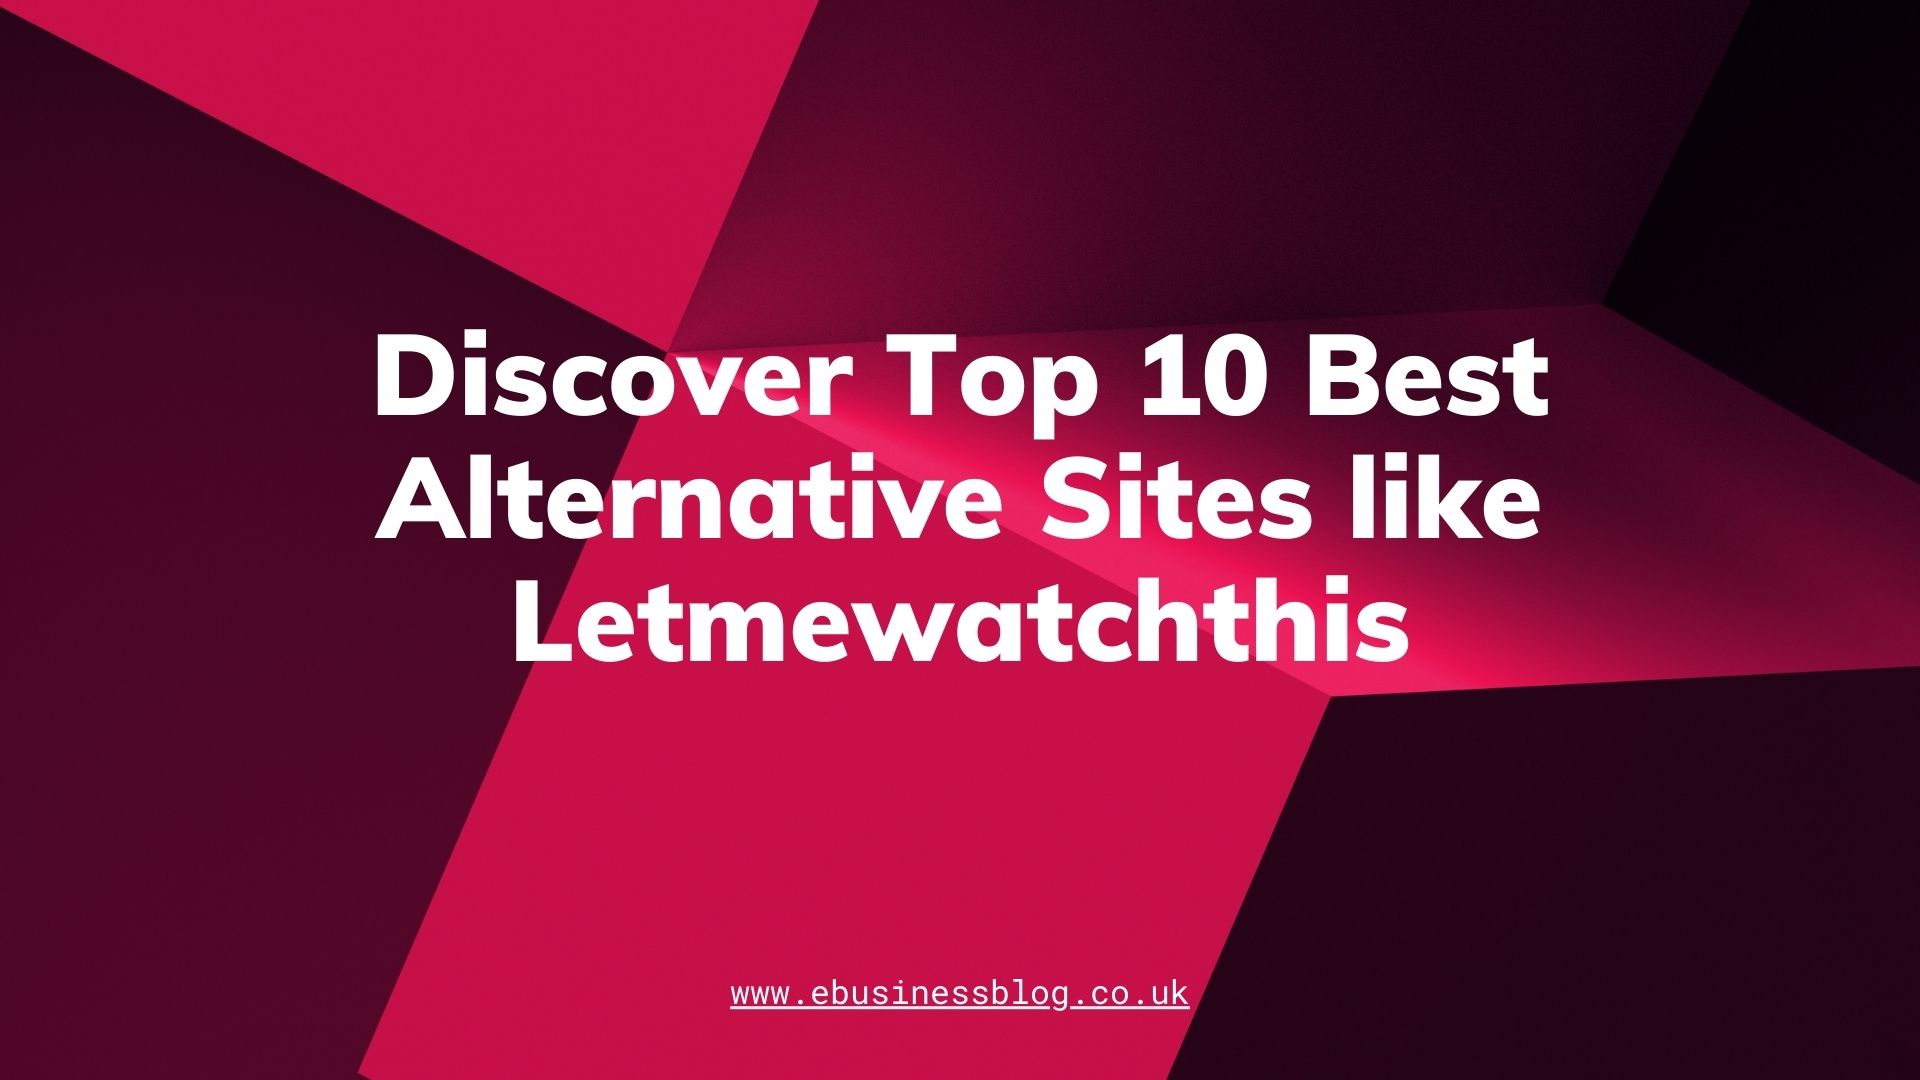 Discover Top 10 Best Alternative Sites like Letmewatchthis (2)